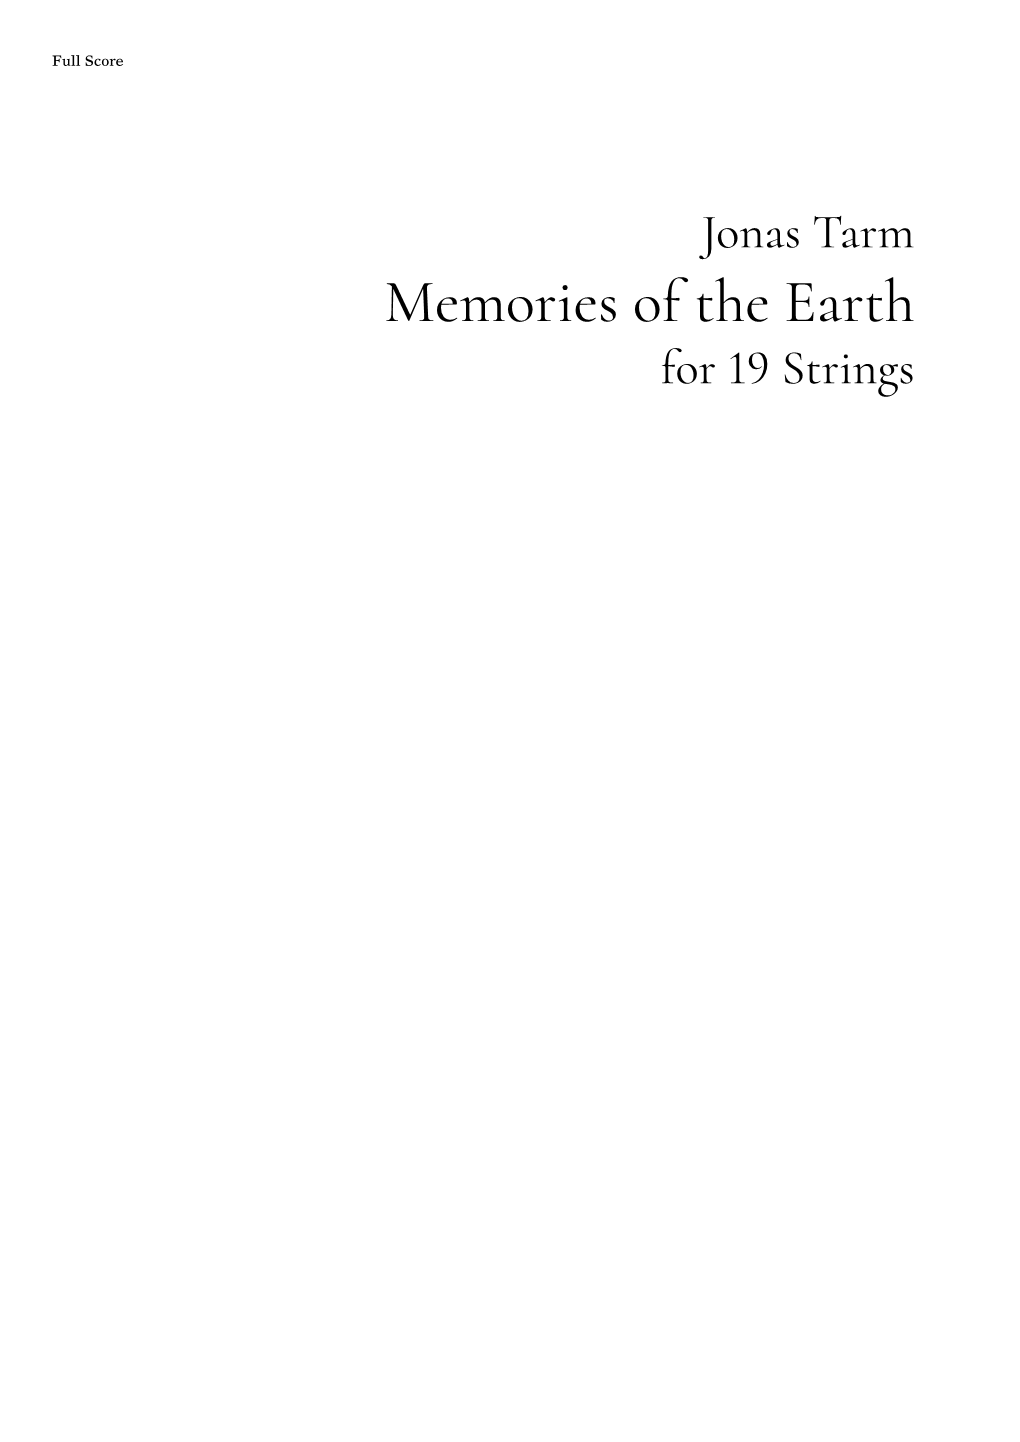 Memories of the Earth for 19 Strings